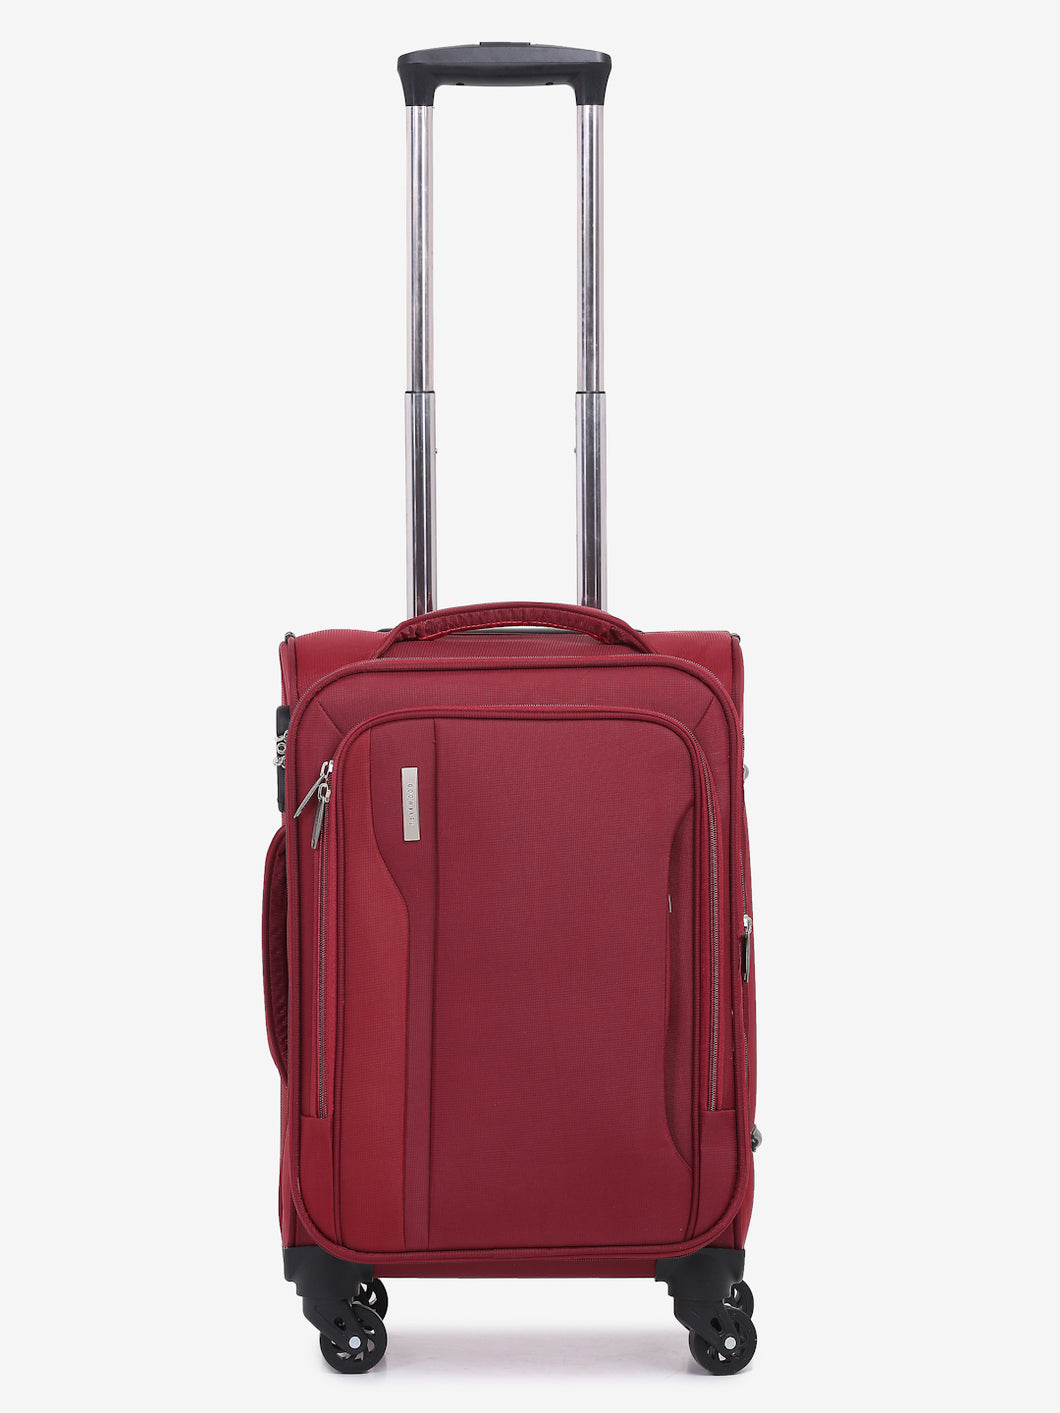 Unisex Red Solid Soft-sided Trolley Suitcase